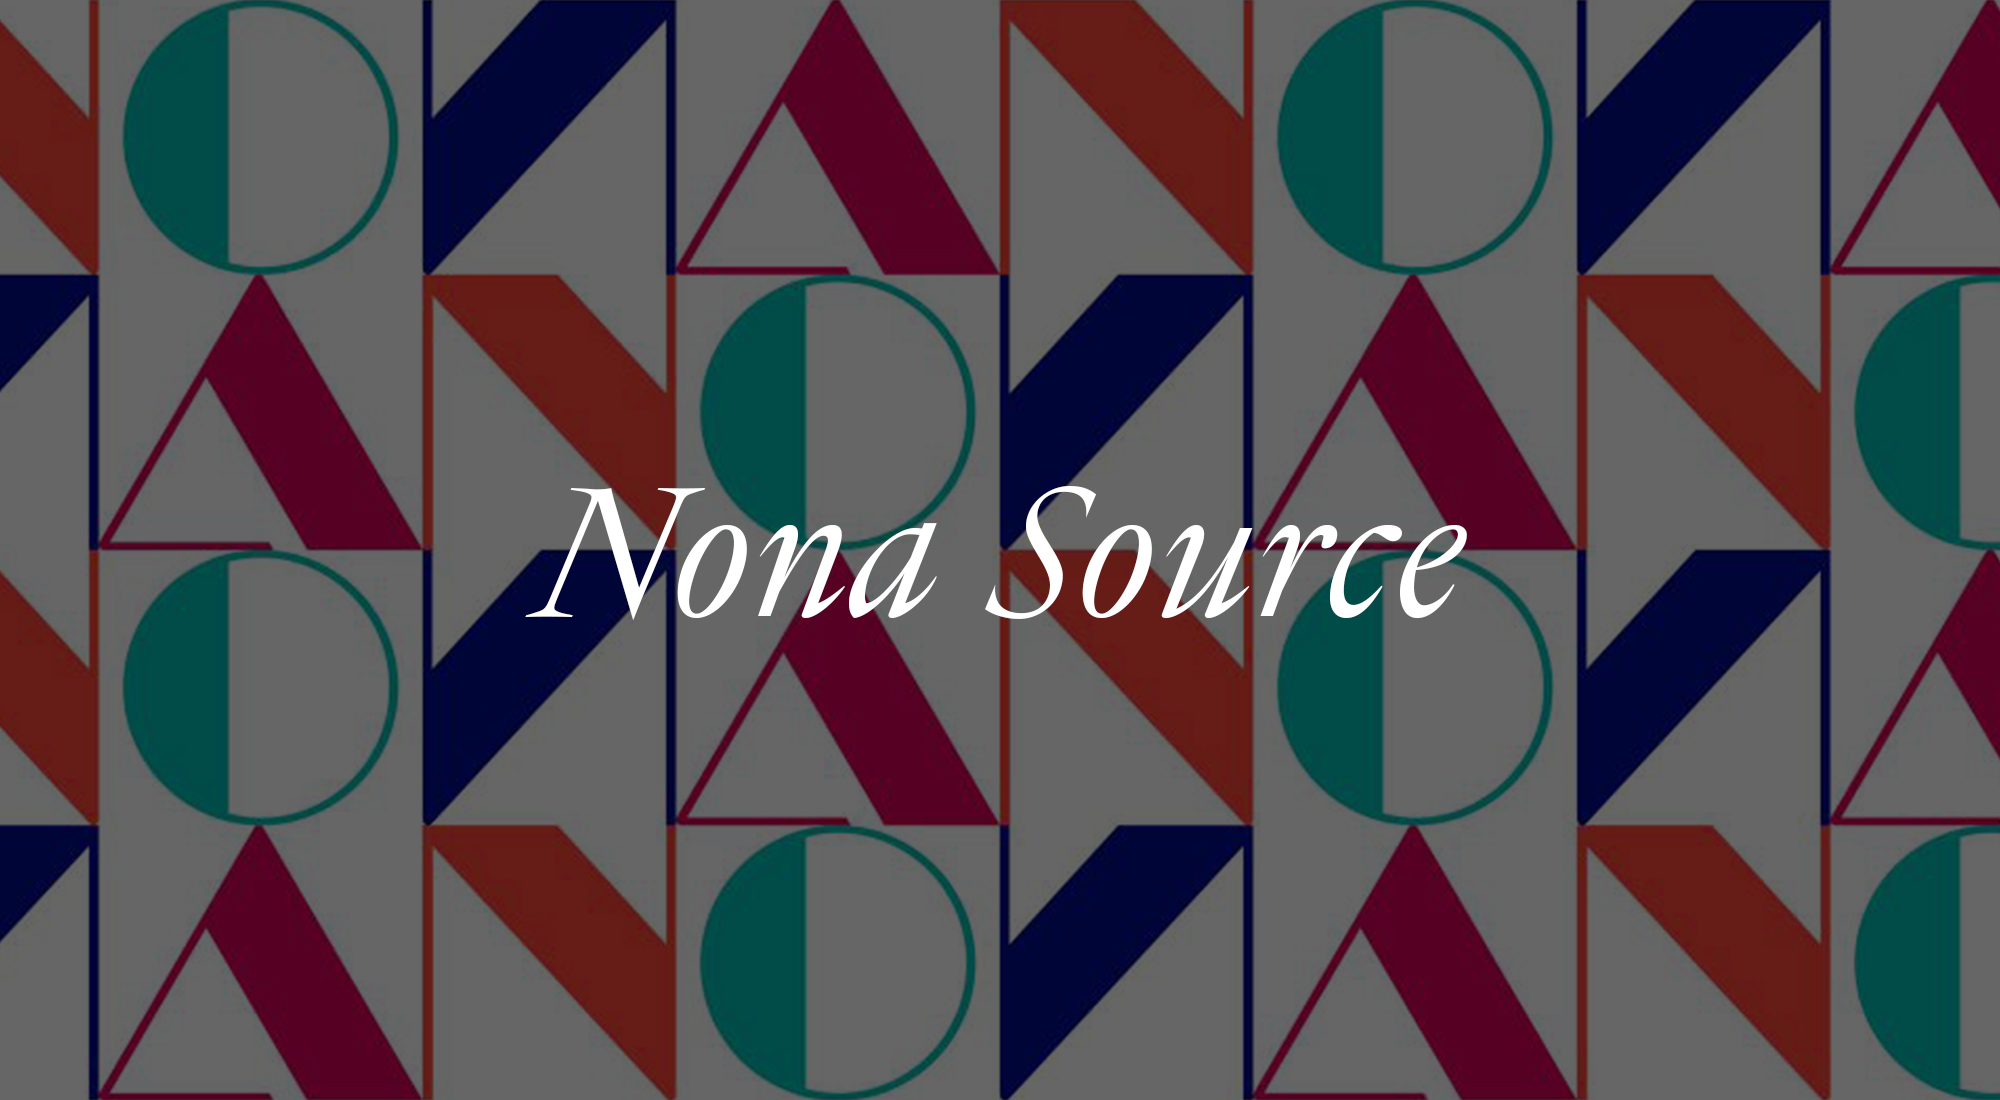 How Louis Vuitton, Dior And Fendi Are Selling On Their Deadstock Fabrics  Via Nona Source